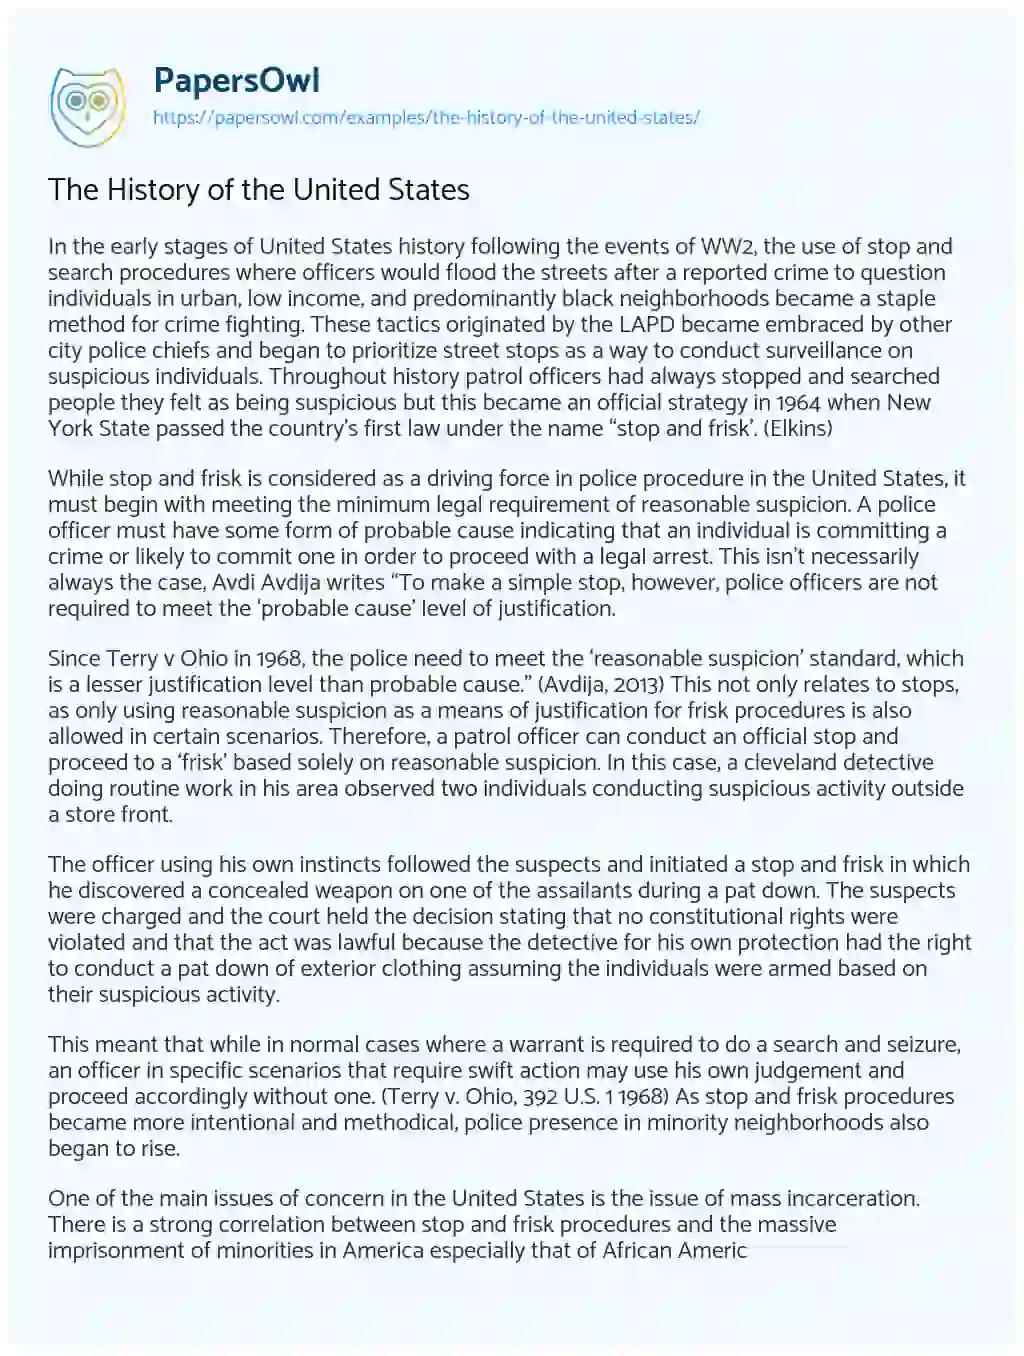 Essay on The History of the United States